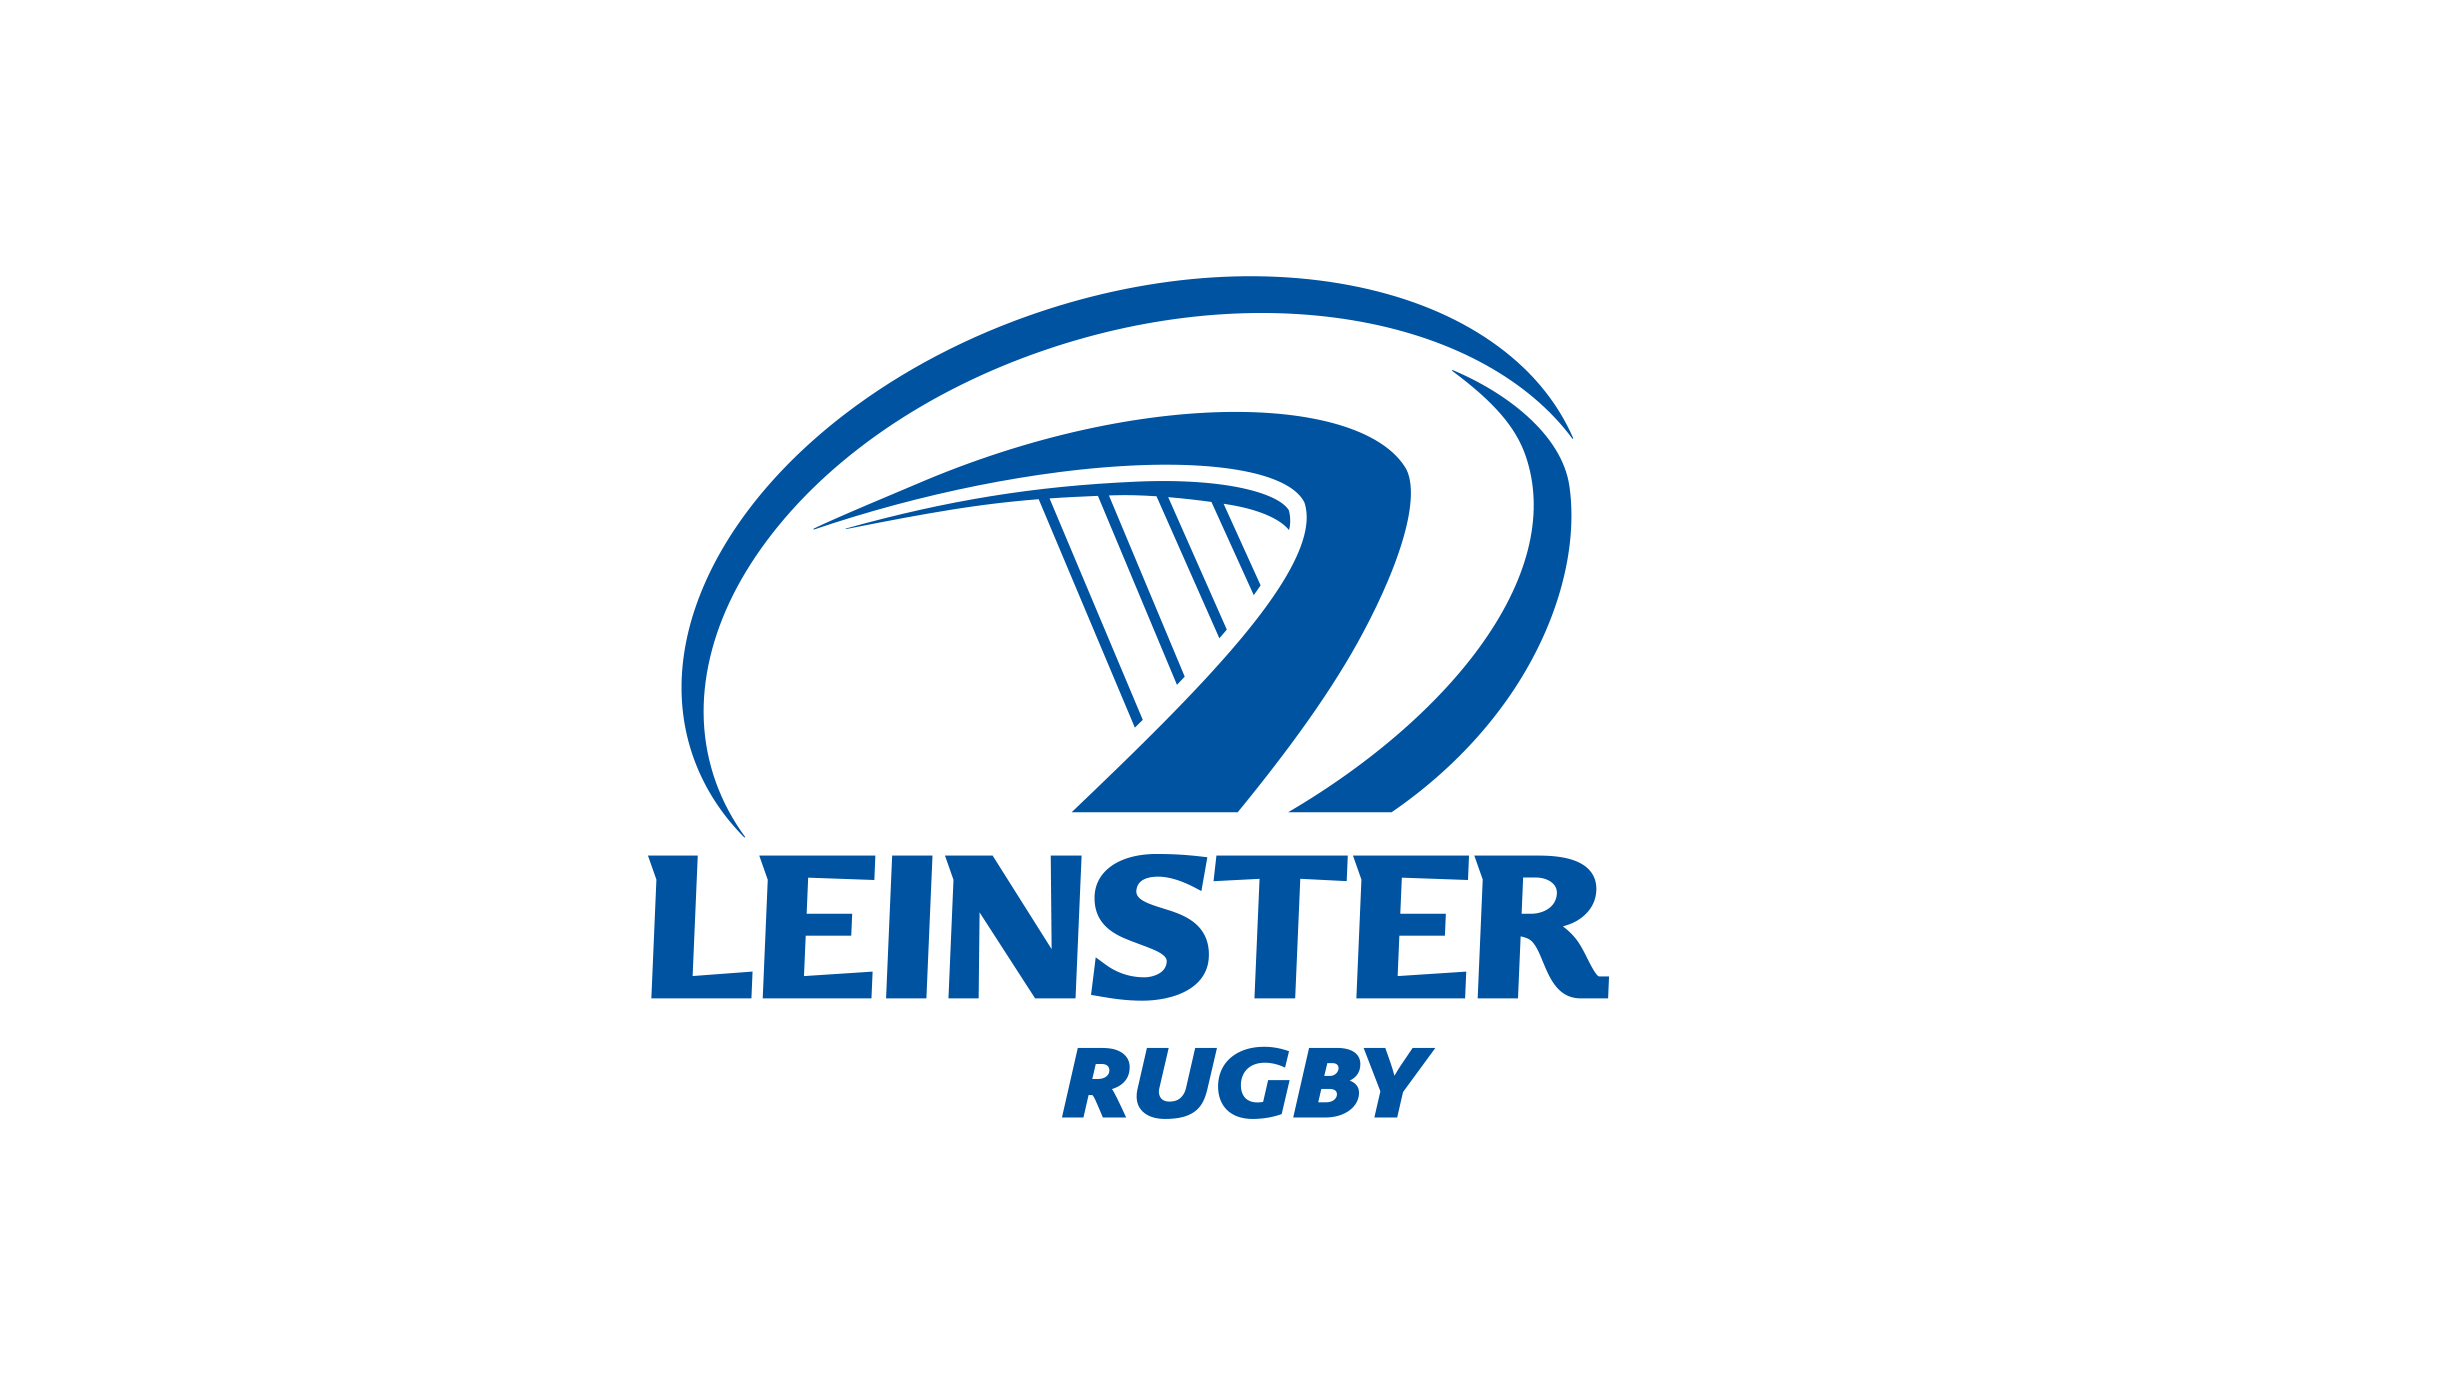 Investec Champions Cup Quarter Final - Leinster v Stade Rochelais in Dublin promo photo for Leinster Rugby Season presale offer code